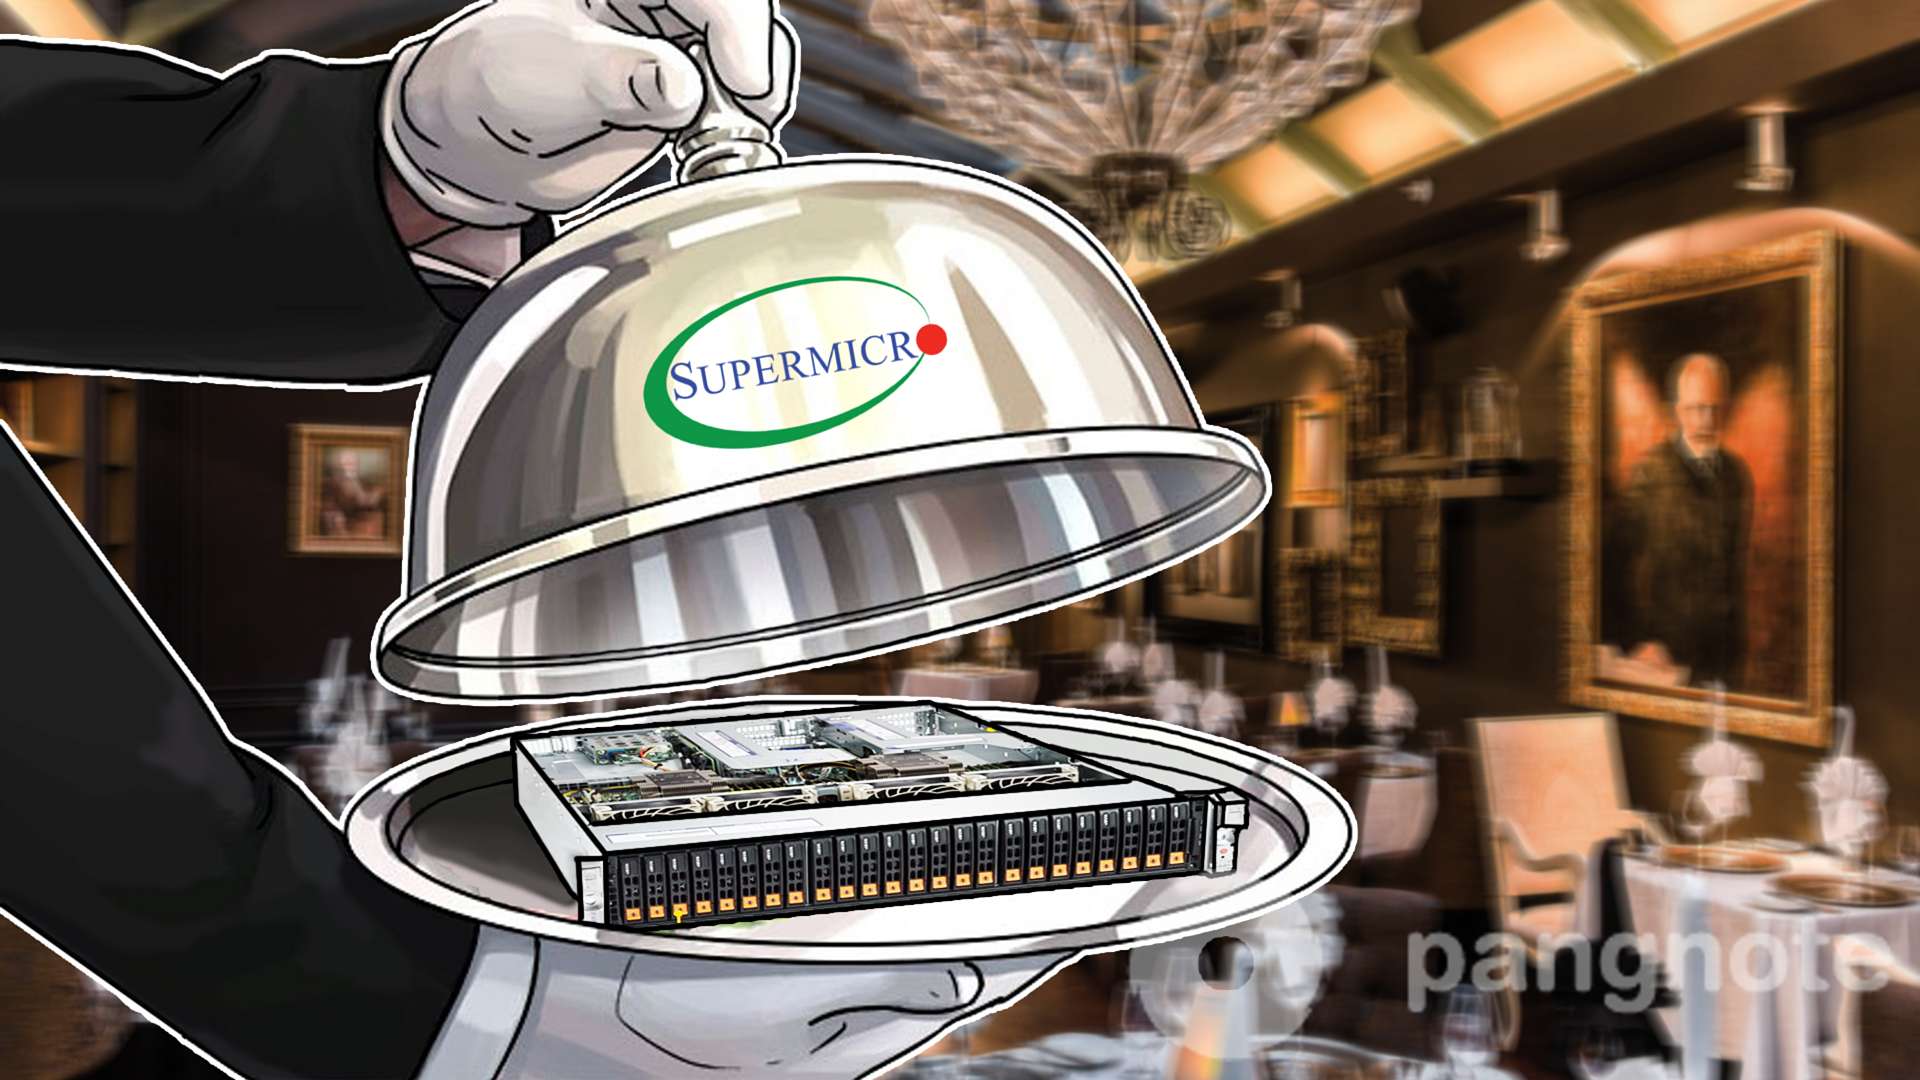 Supermicro released Platform with 320 PCI Express buses